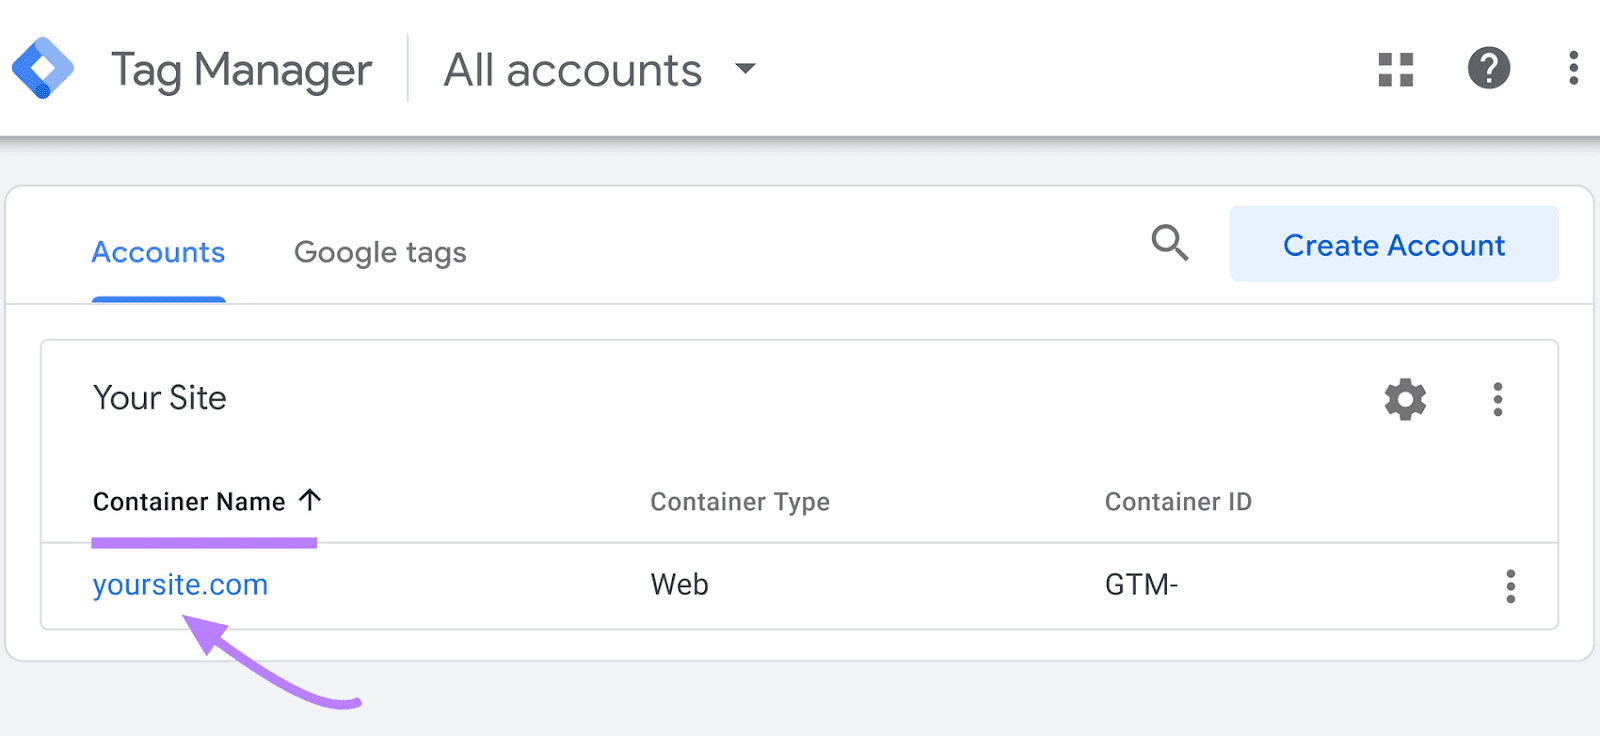 "yoursite.com" selected nether  “Container Name” successful  Tag Manager